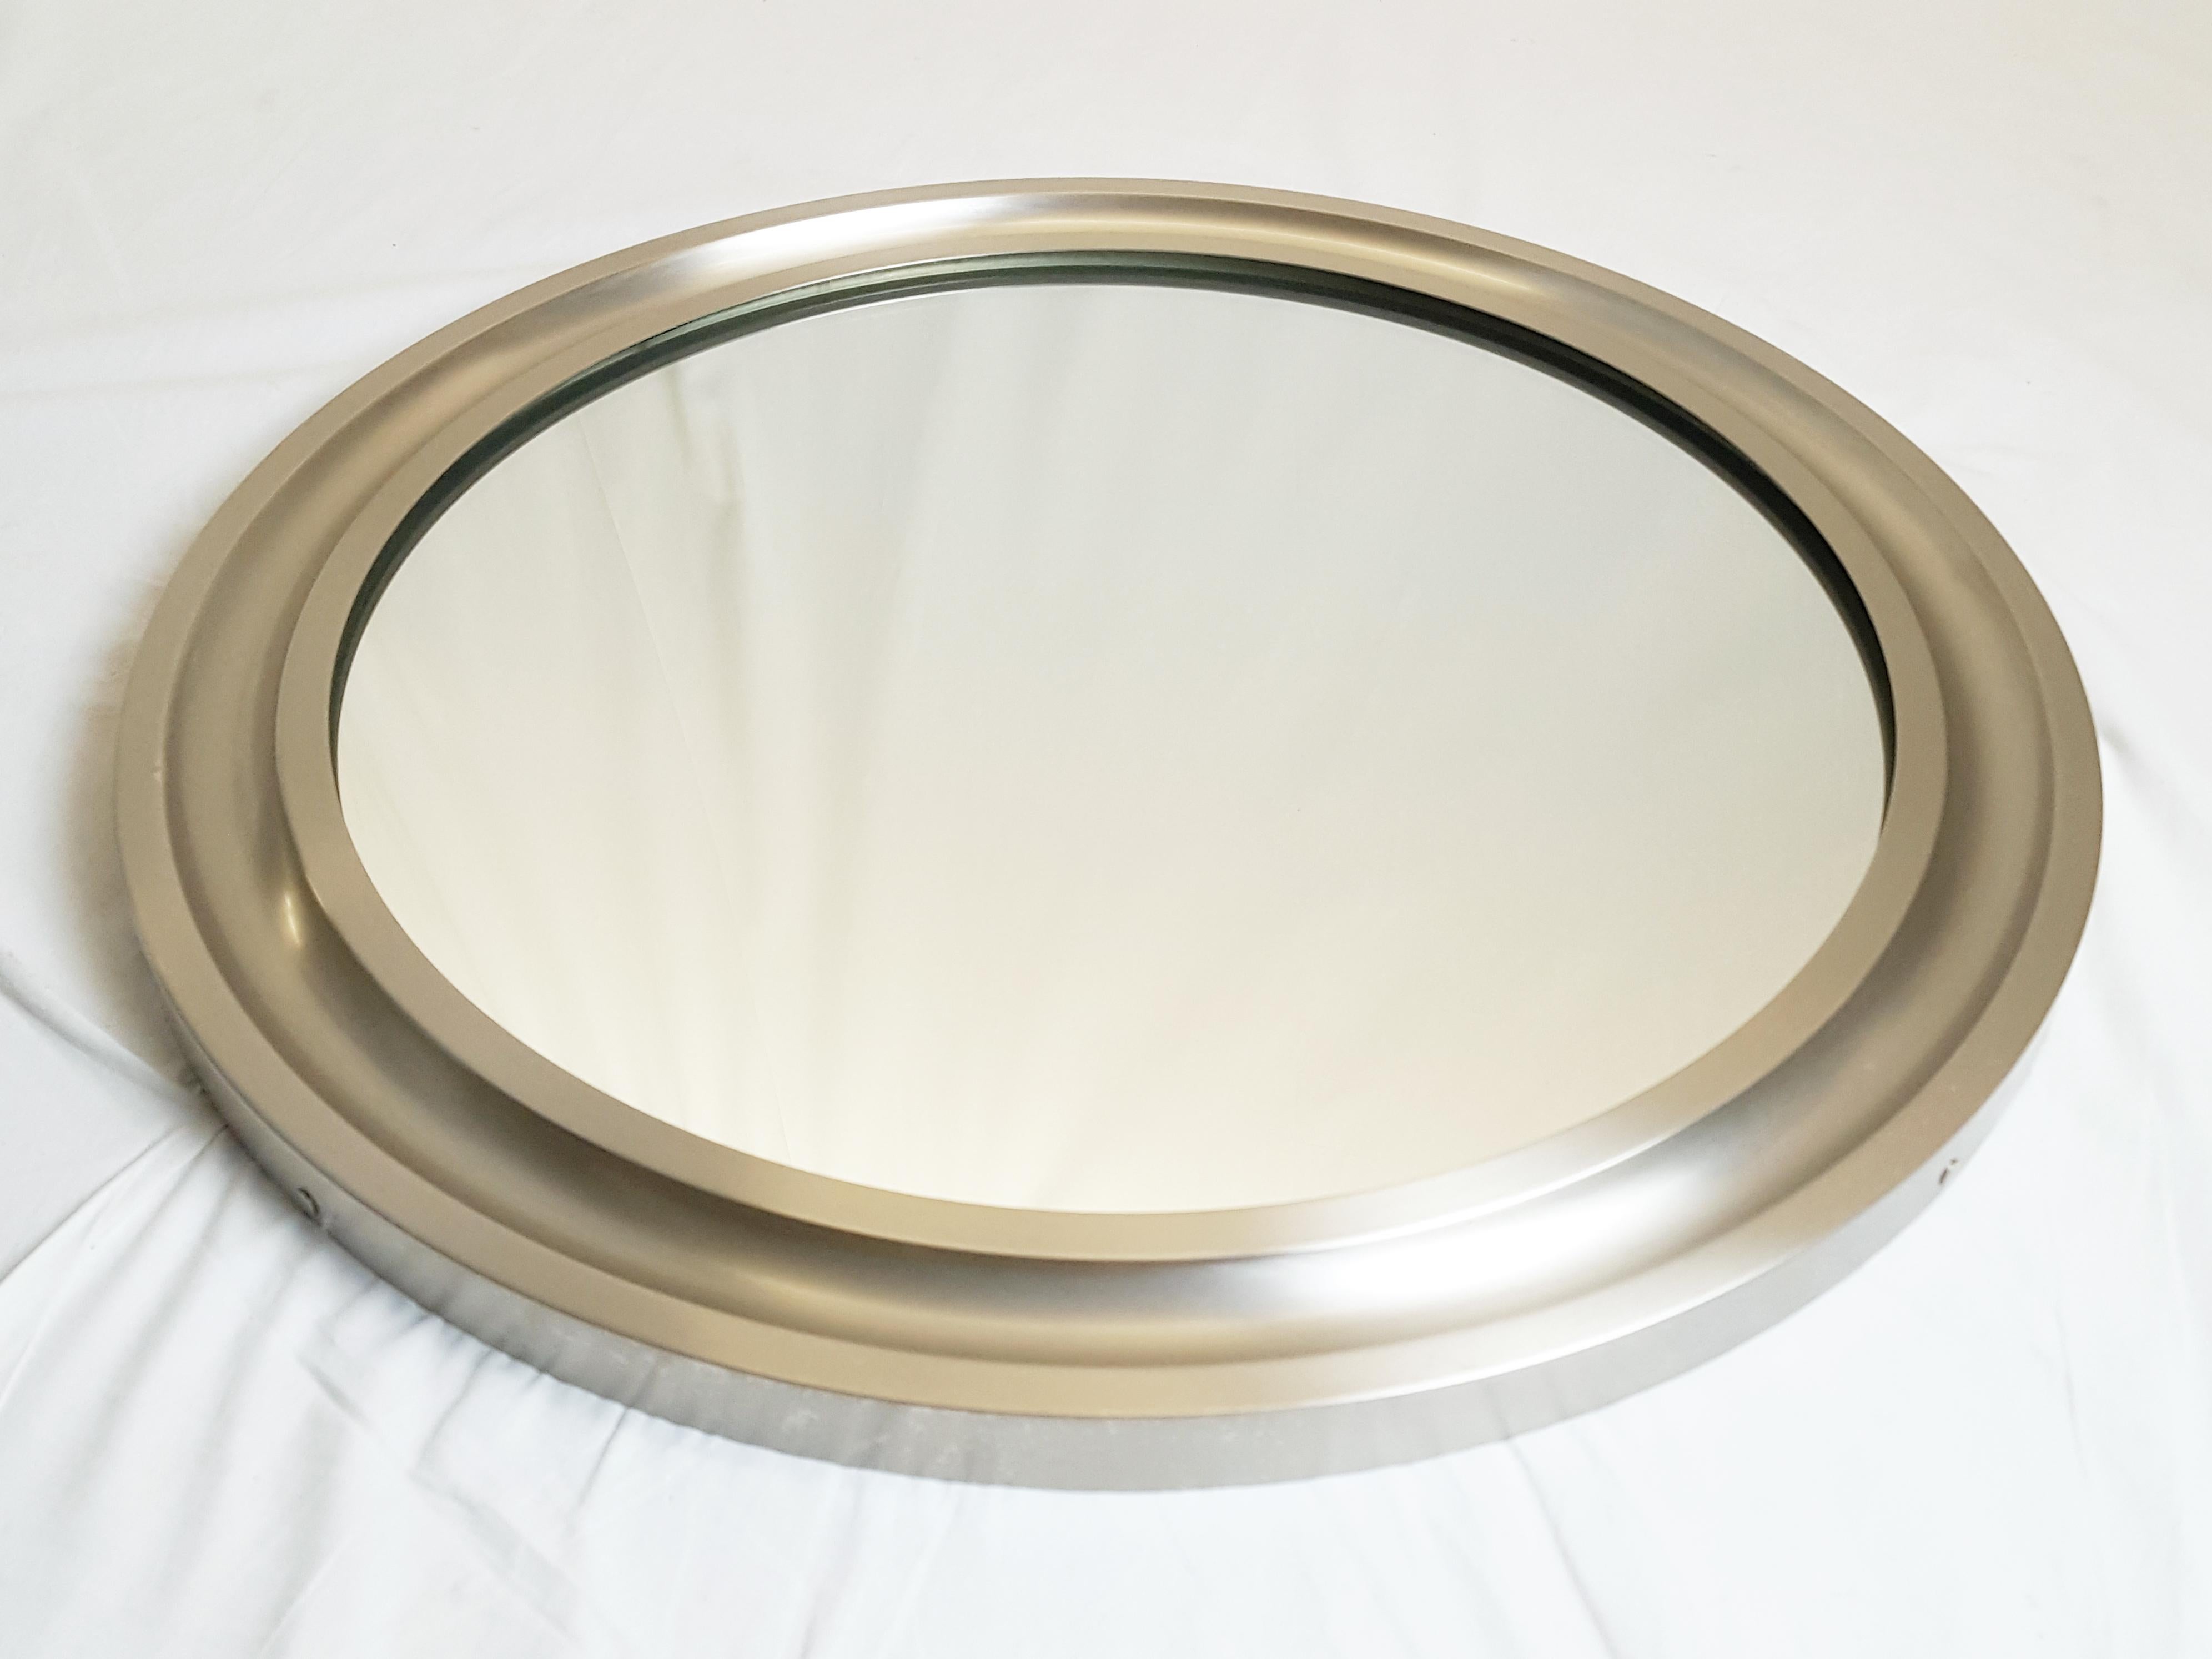 Nickeled & Black Metal 1970s Round Wall Mirror Narcisso by S. Mazza for Artemide 6